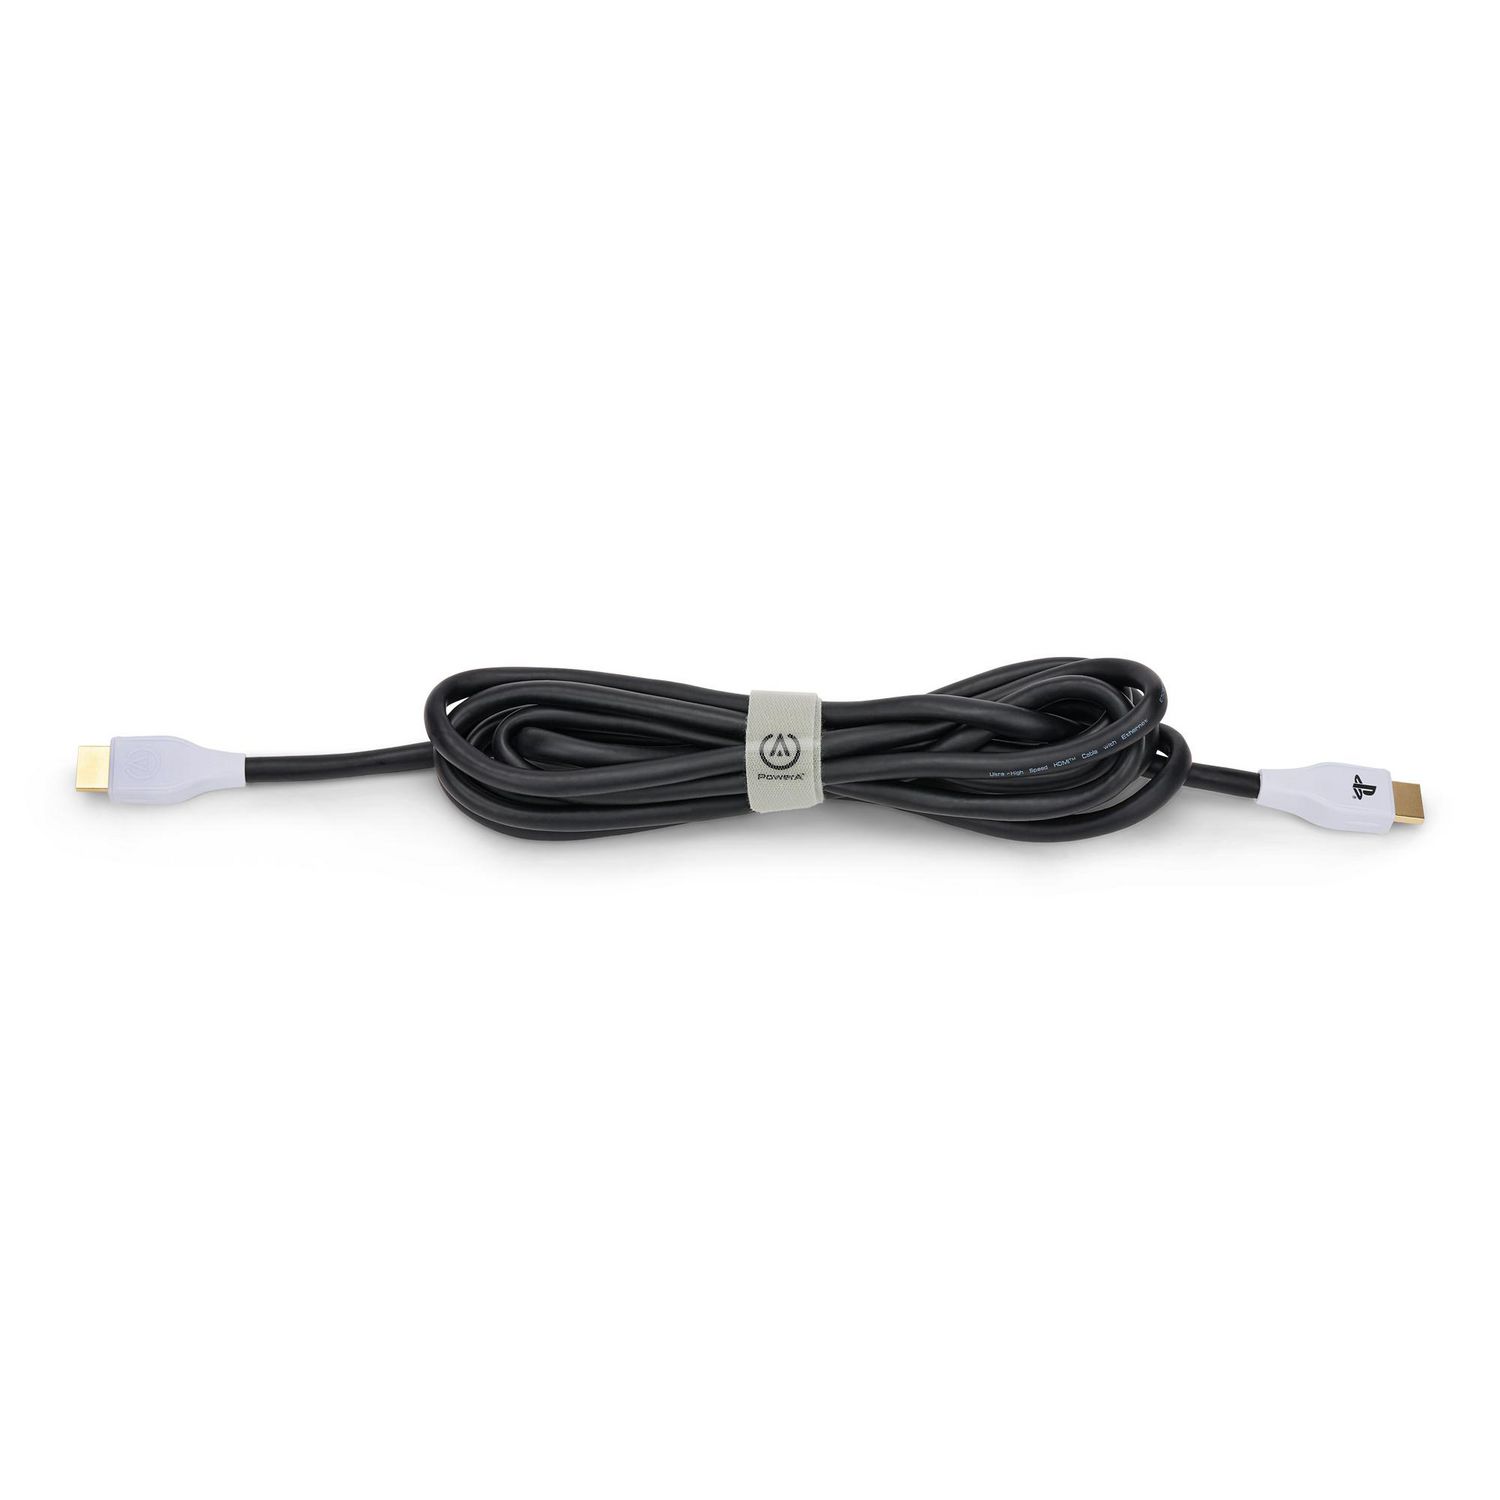 Ultra High Speed HDMI Cable for PlayStation 5